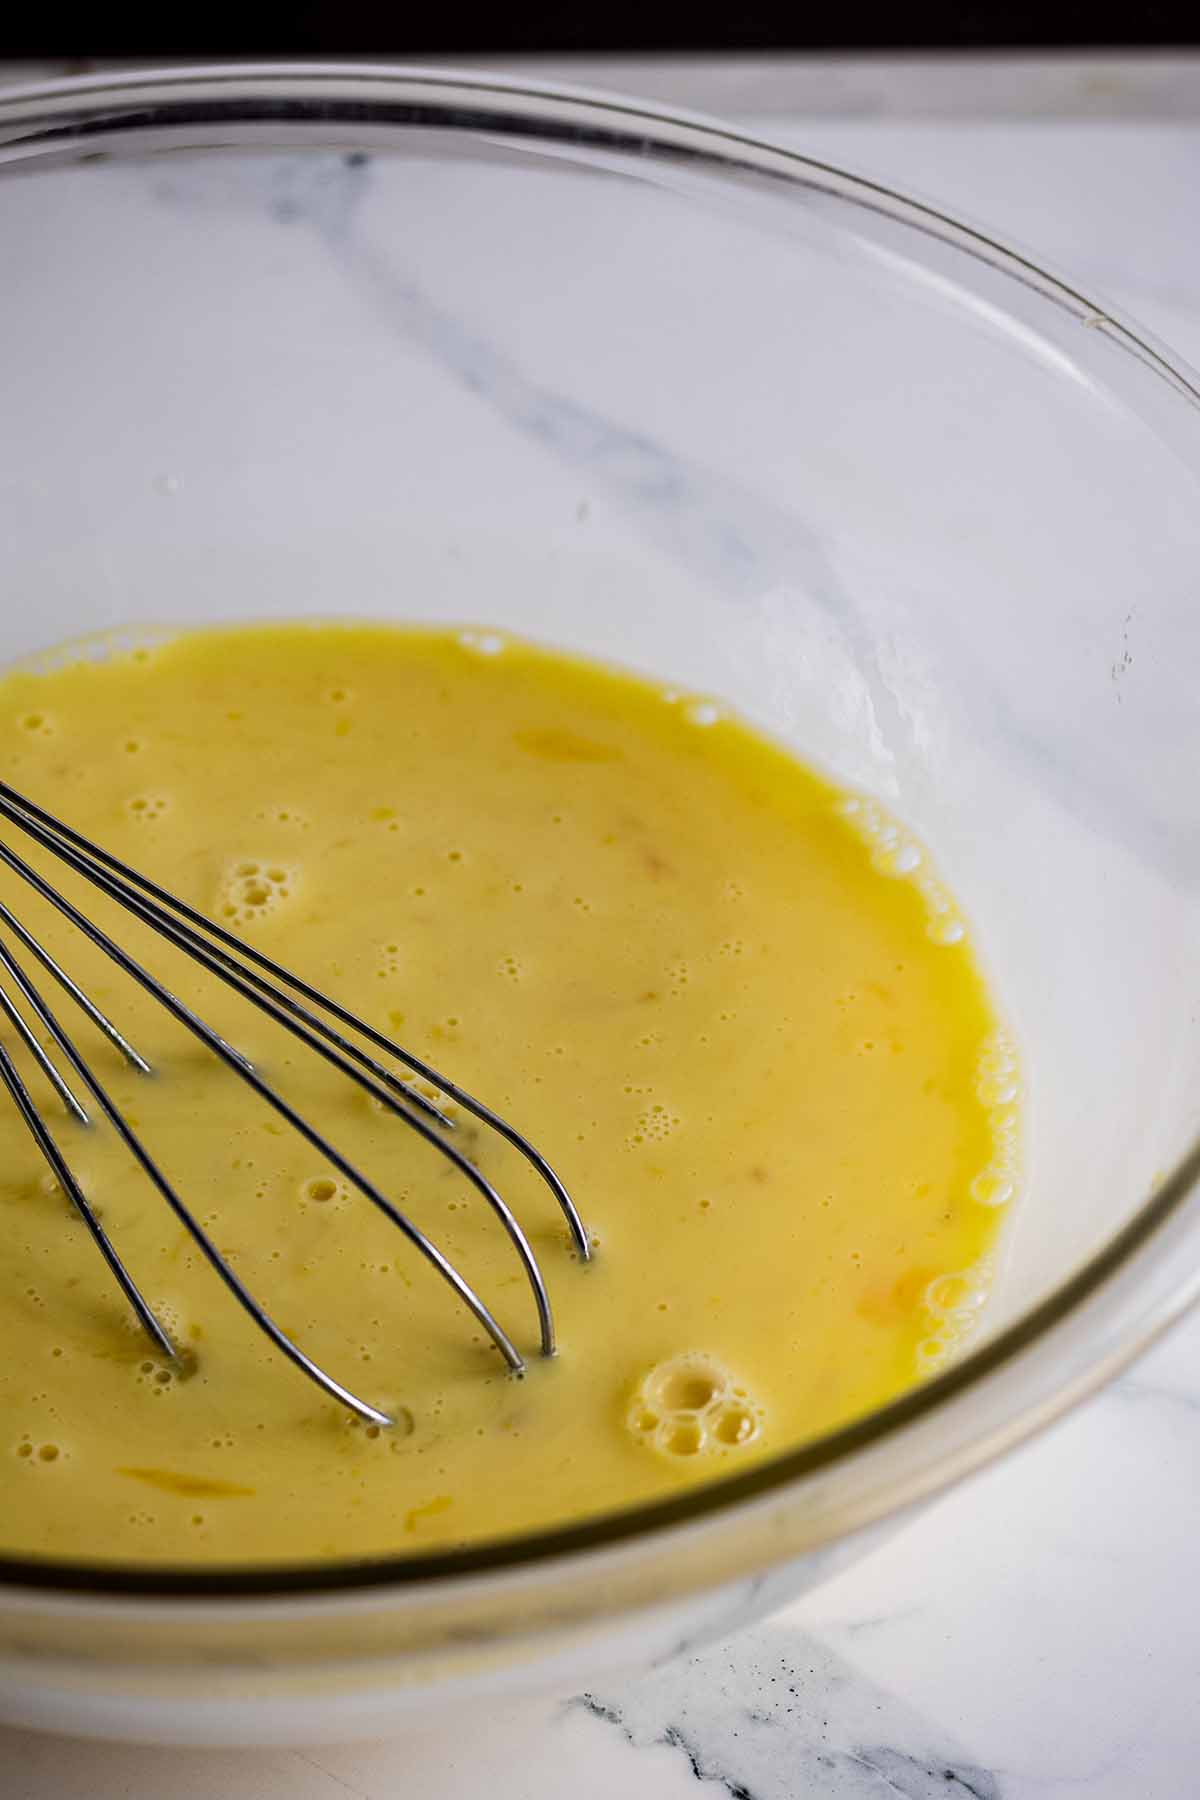 Beaten eggs in a glass bowl with a whisk